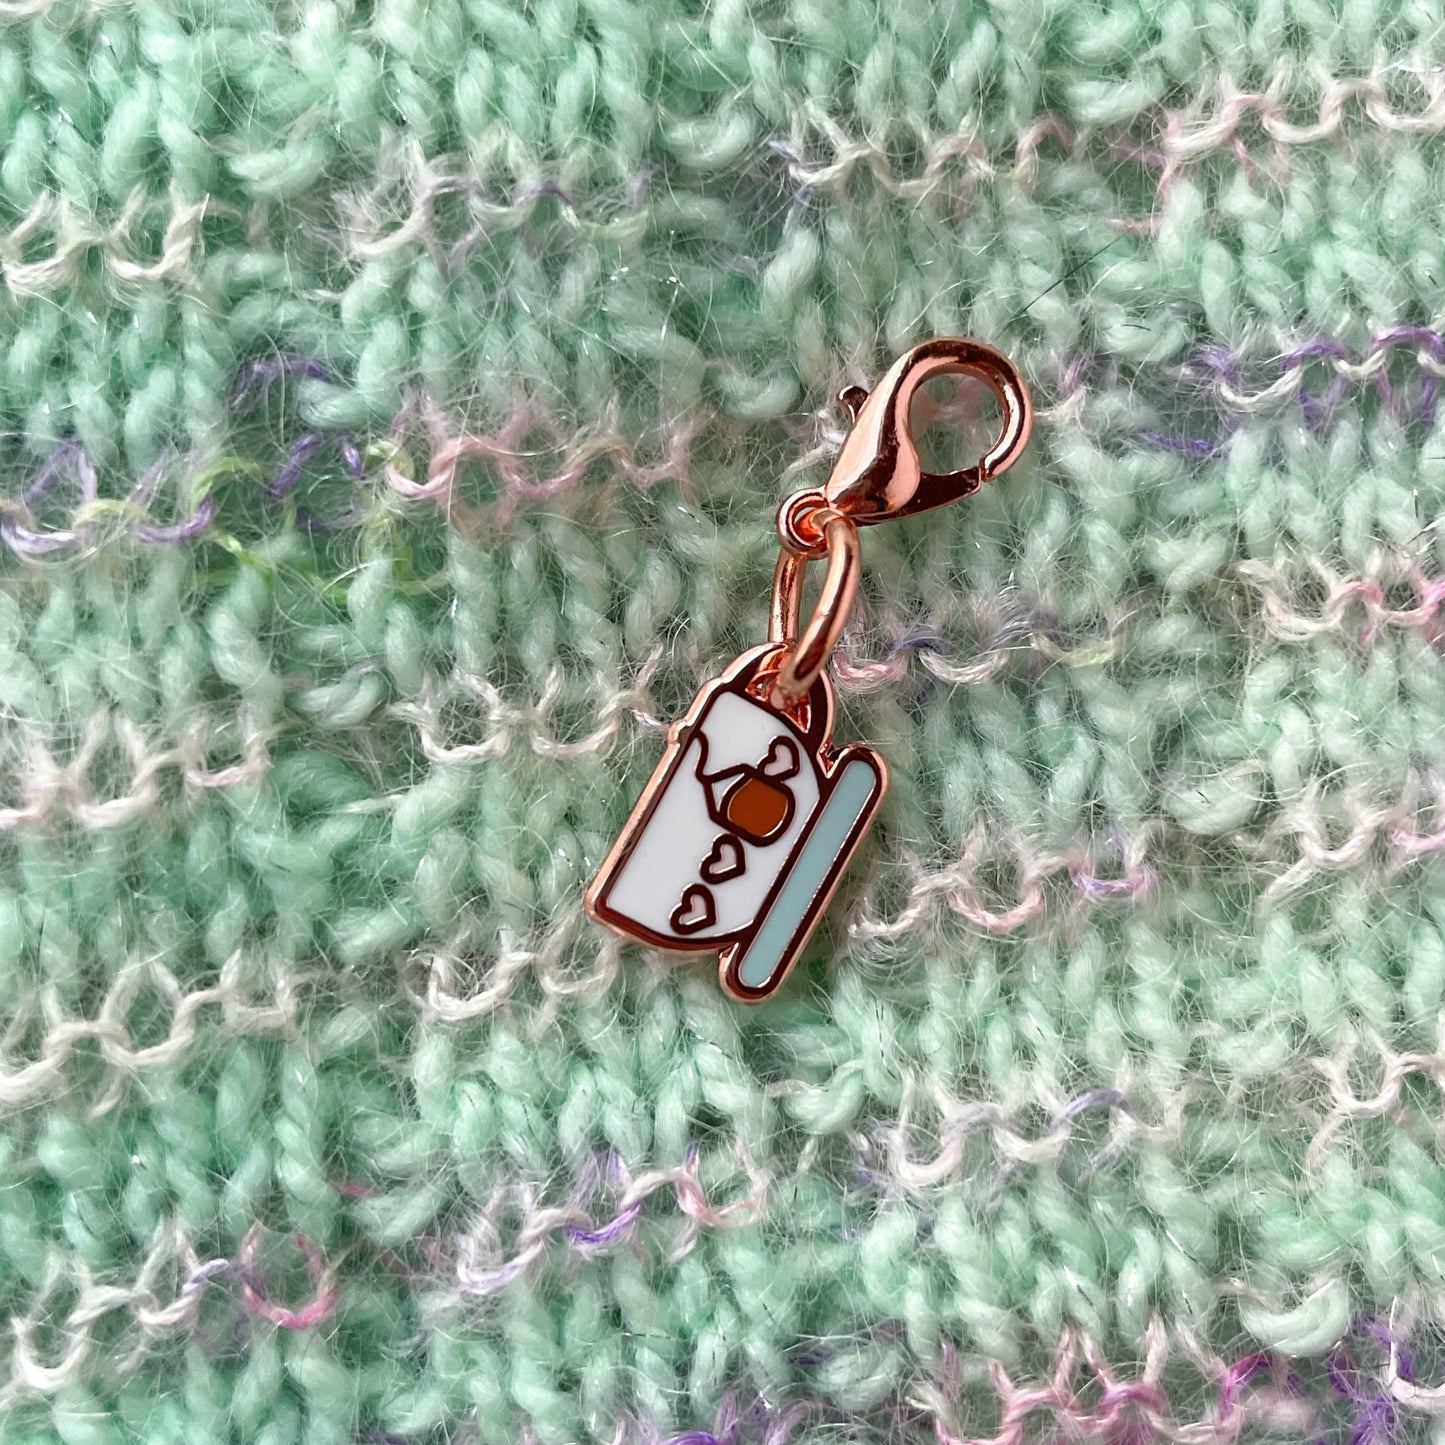 A charm on a lobster claw clasp that is shaped like a teacup with pink hearts on it and a teabag. The charm is on a hand knit background.